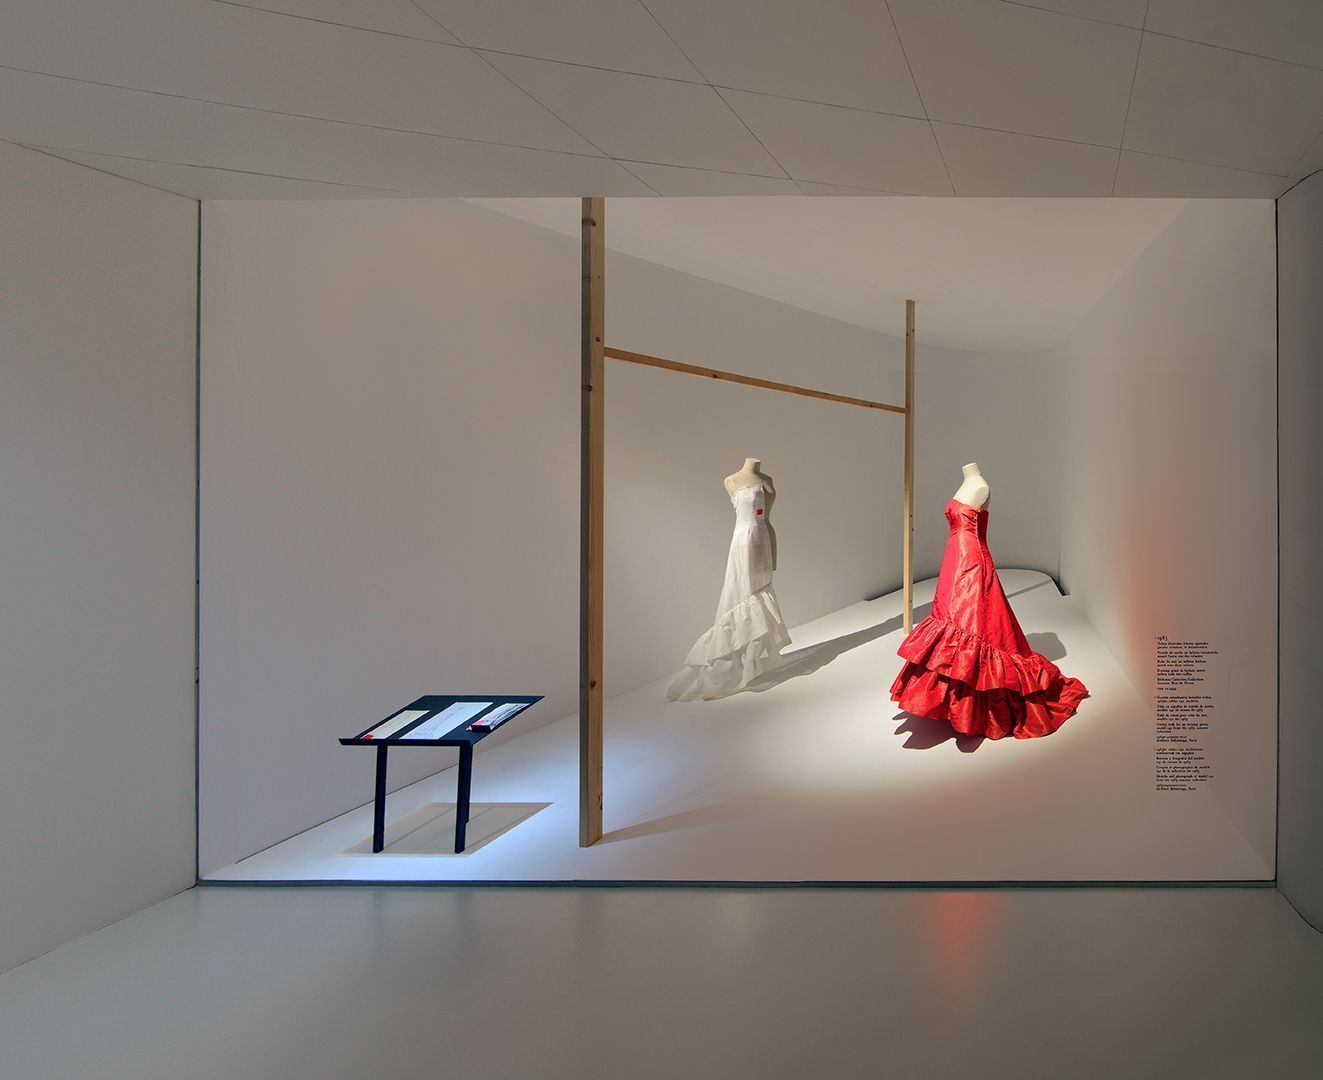 nuttet Displacement indhold Dress Historians on Twitter: "A virtual experience of the “Cristóbal  Balenciaga, Fashion and Heritage” exhibition at the Cristóbal Balenciaga  Museoa in Getaria, Spain is now available. To experience the exhibition  click, here: